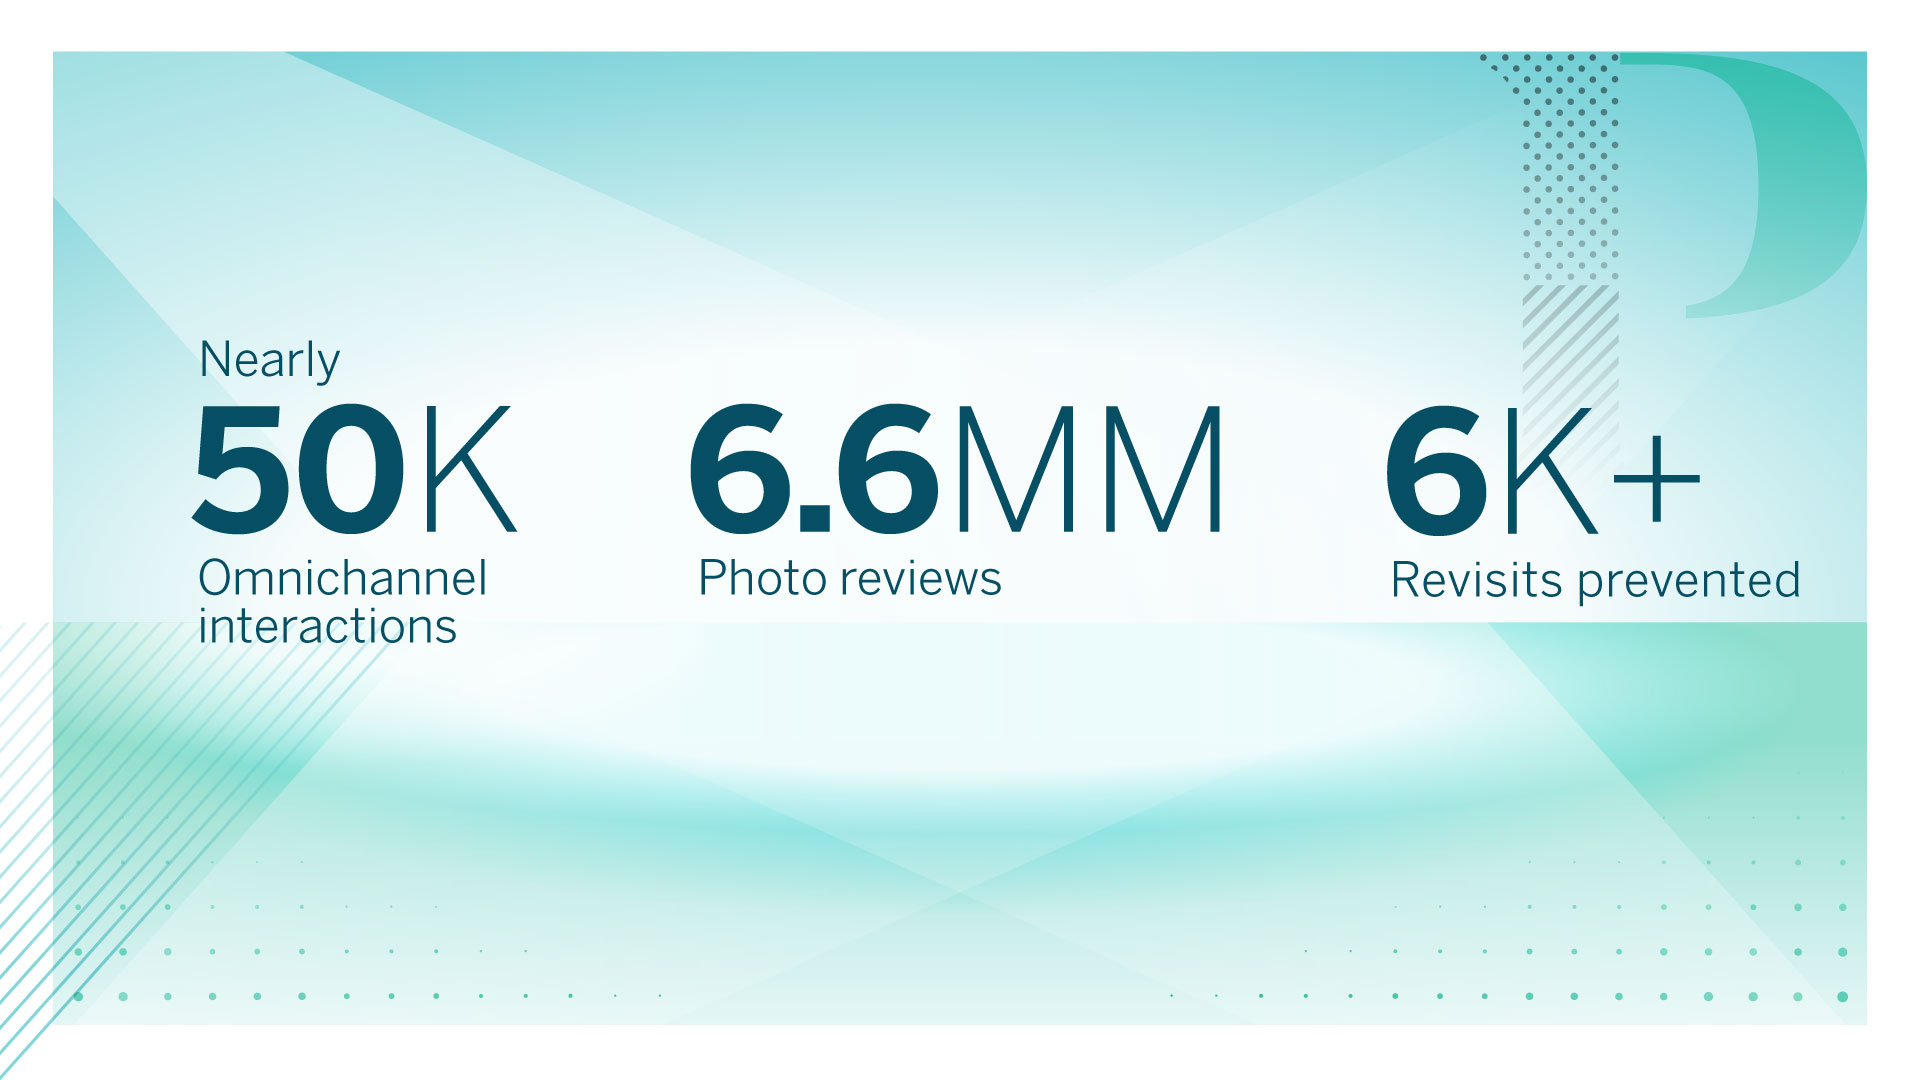 Nearly 50K omnichannel interactions, 6.6MM Photo views and 6K plus revisits prevented